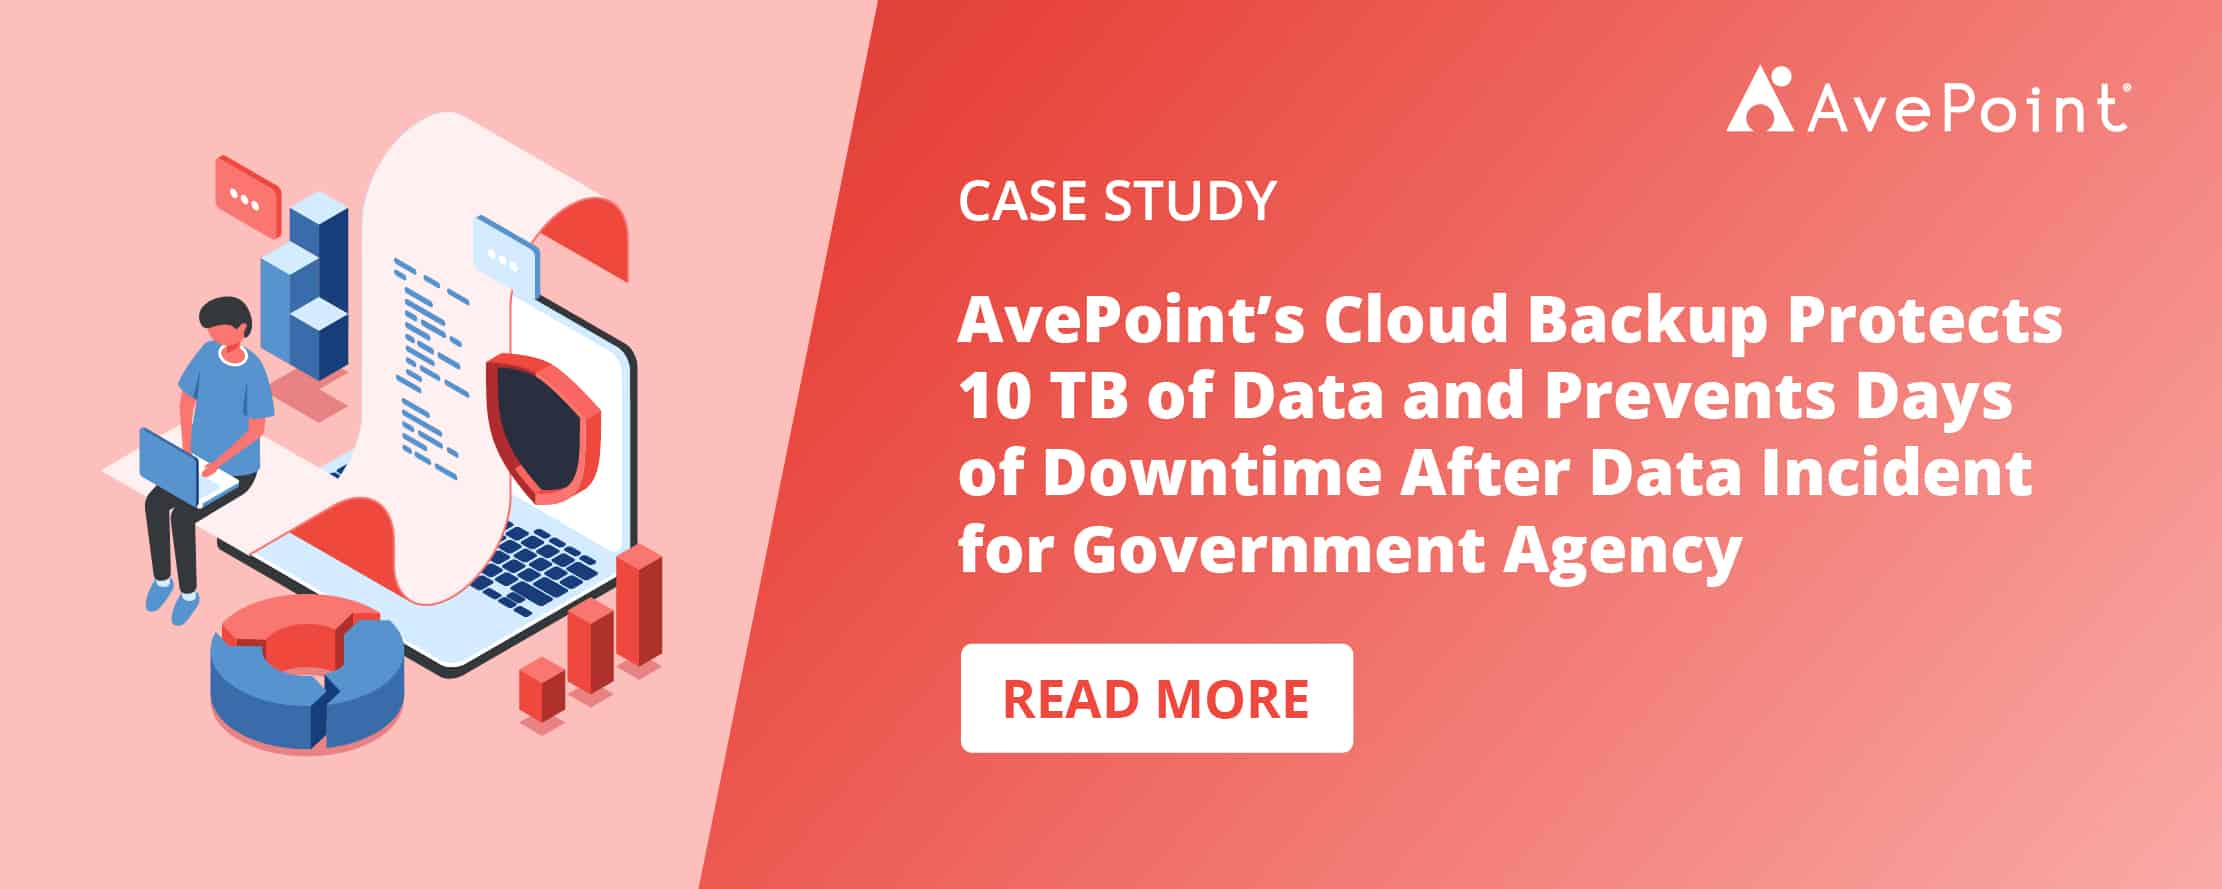 avepoint-NEH-cloud-backup-case-study